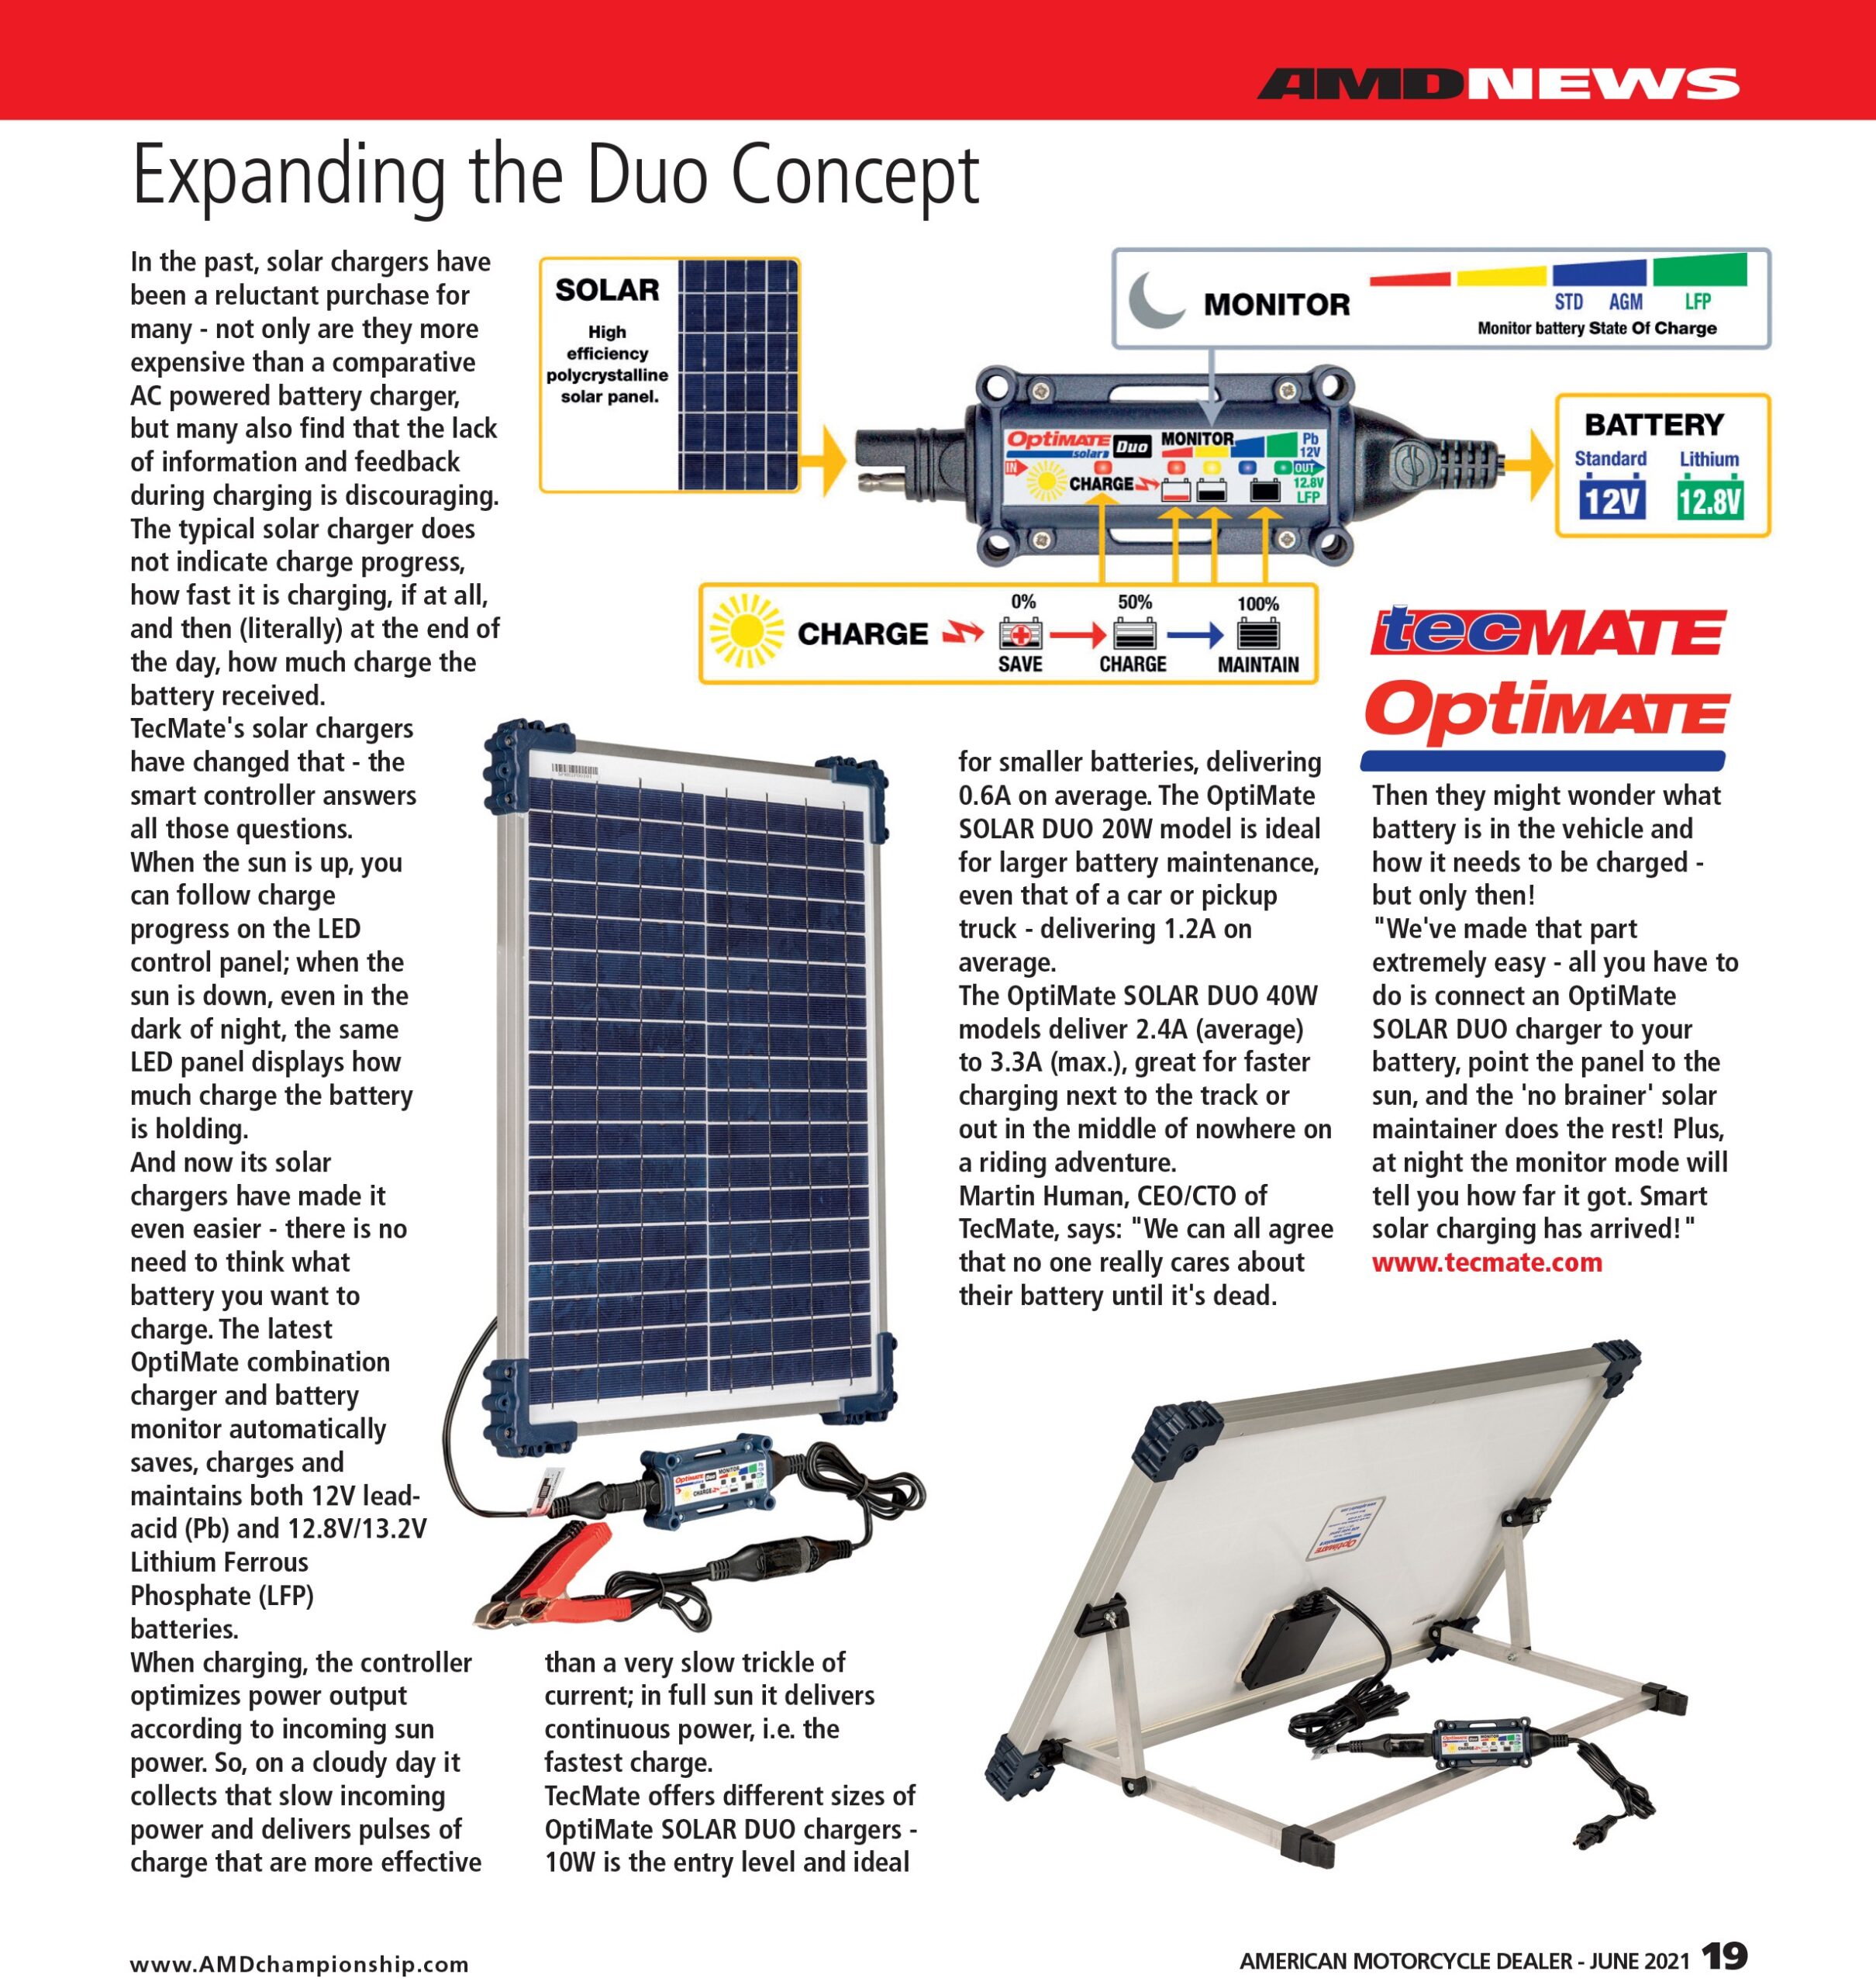 Article about the OptiMate Solar DUO battery charger technology